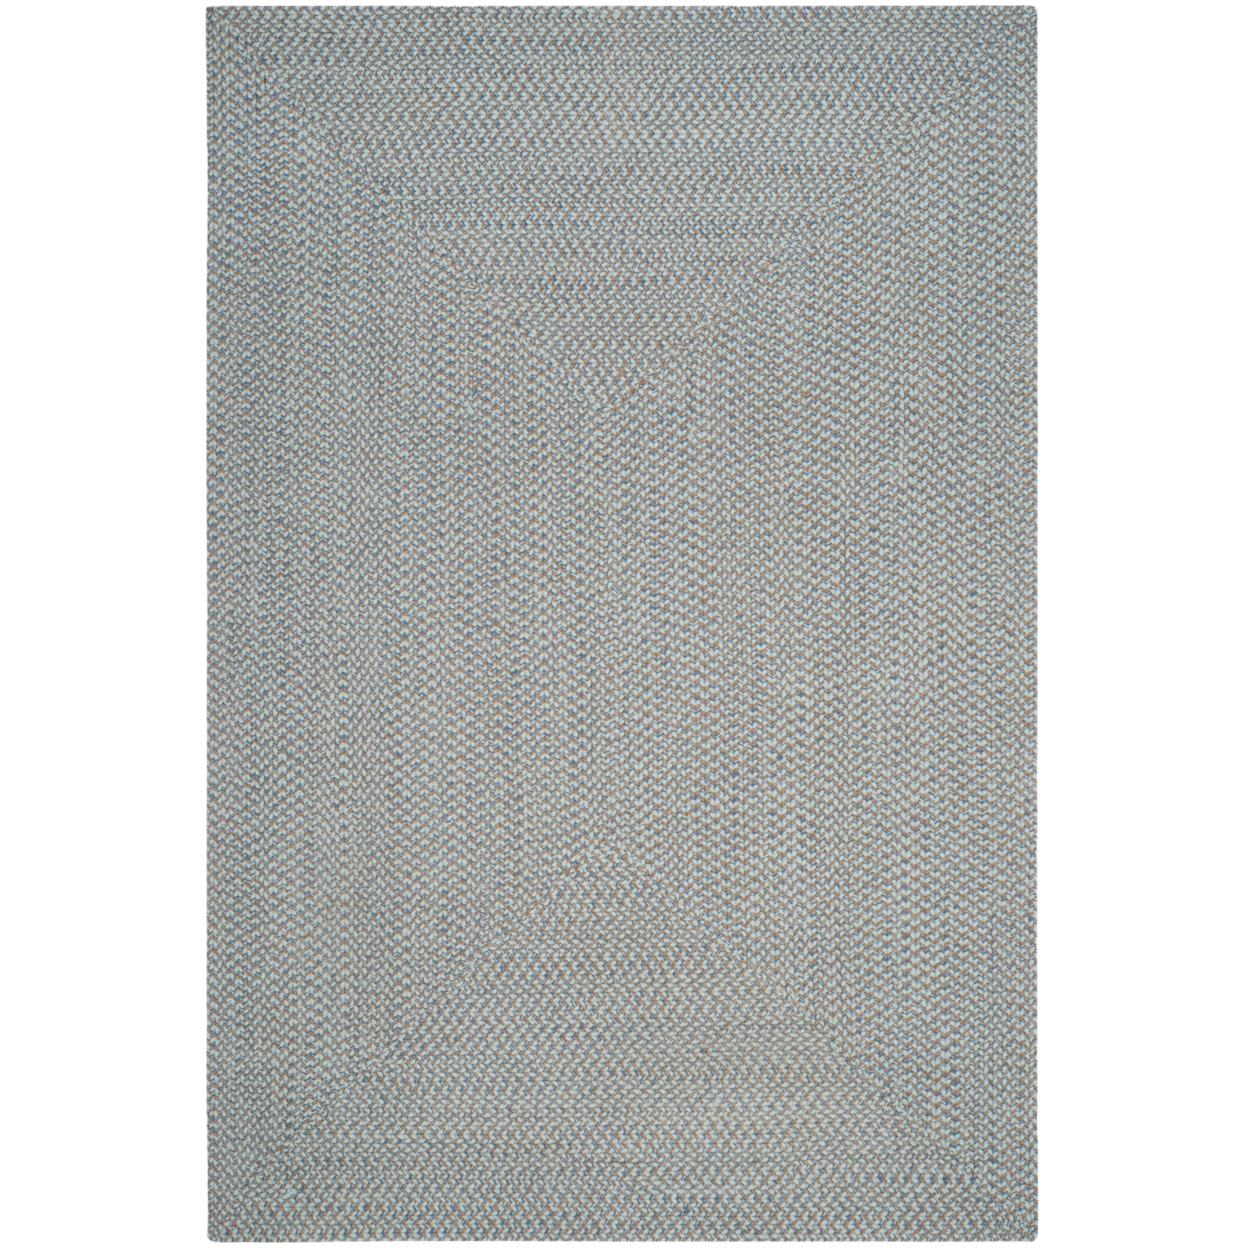 SAFAVIEH Braided Collection BRD170A Handwoven Multi Rug - 6' X 9'